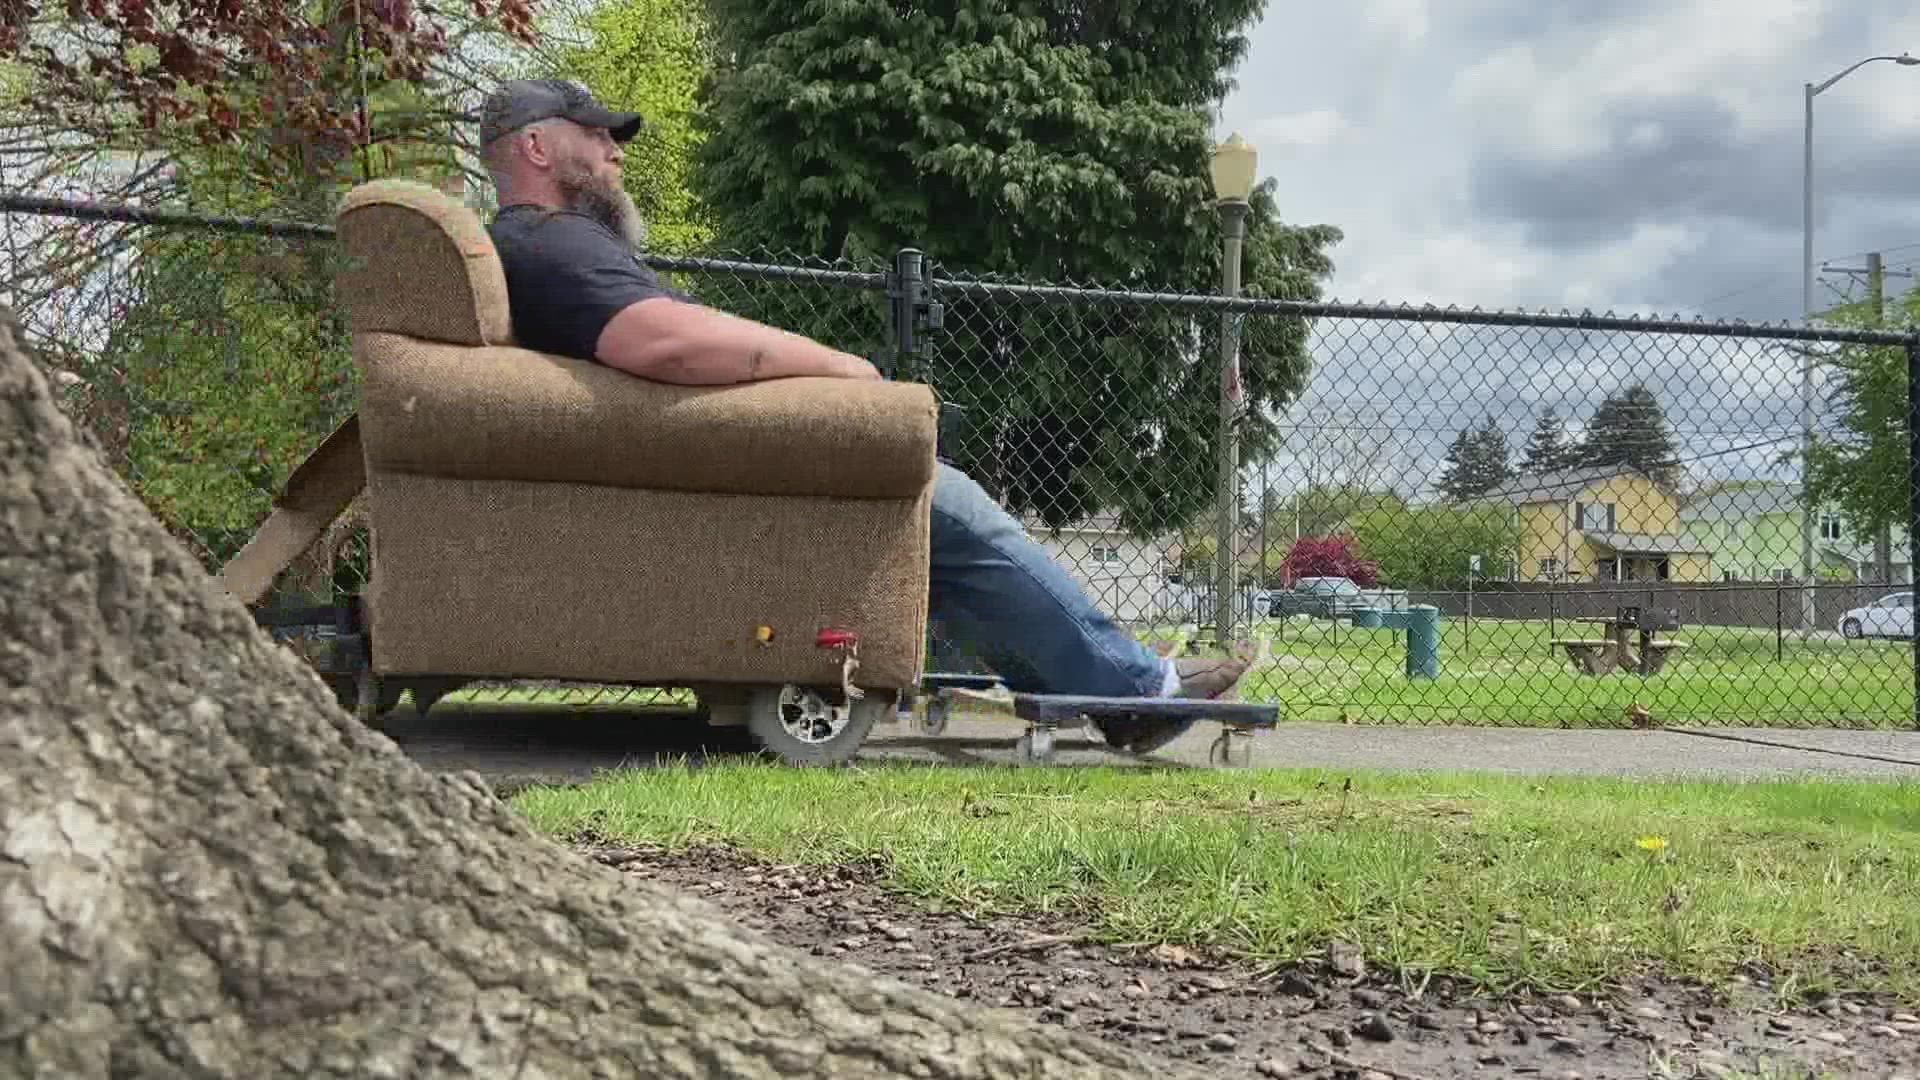 Tacoma Couch Guy has been making the rounds on social media lately because he’s been spotted making the rounds in his neighborhood on a couch.